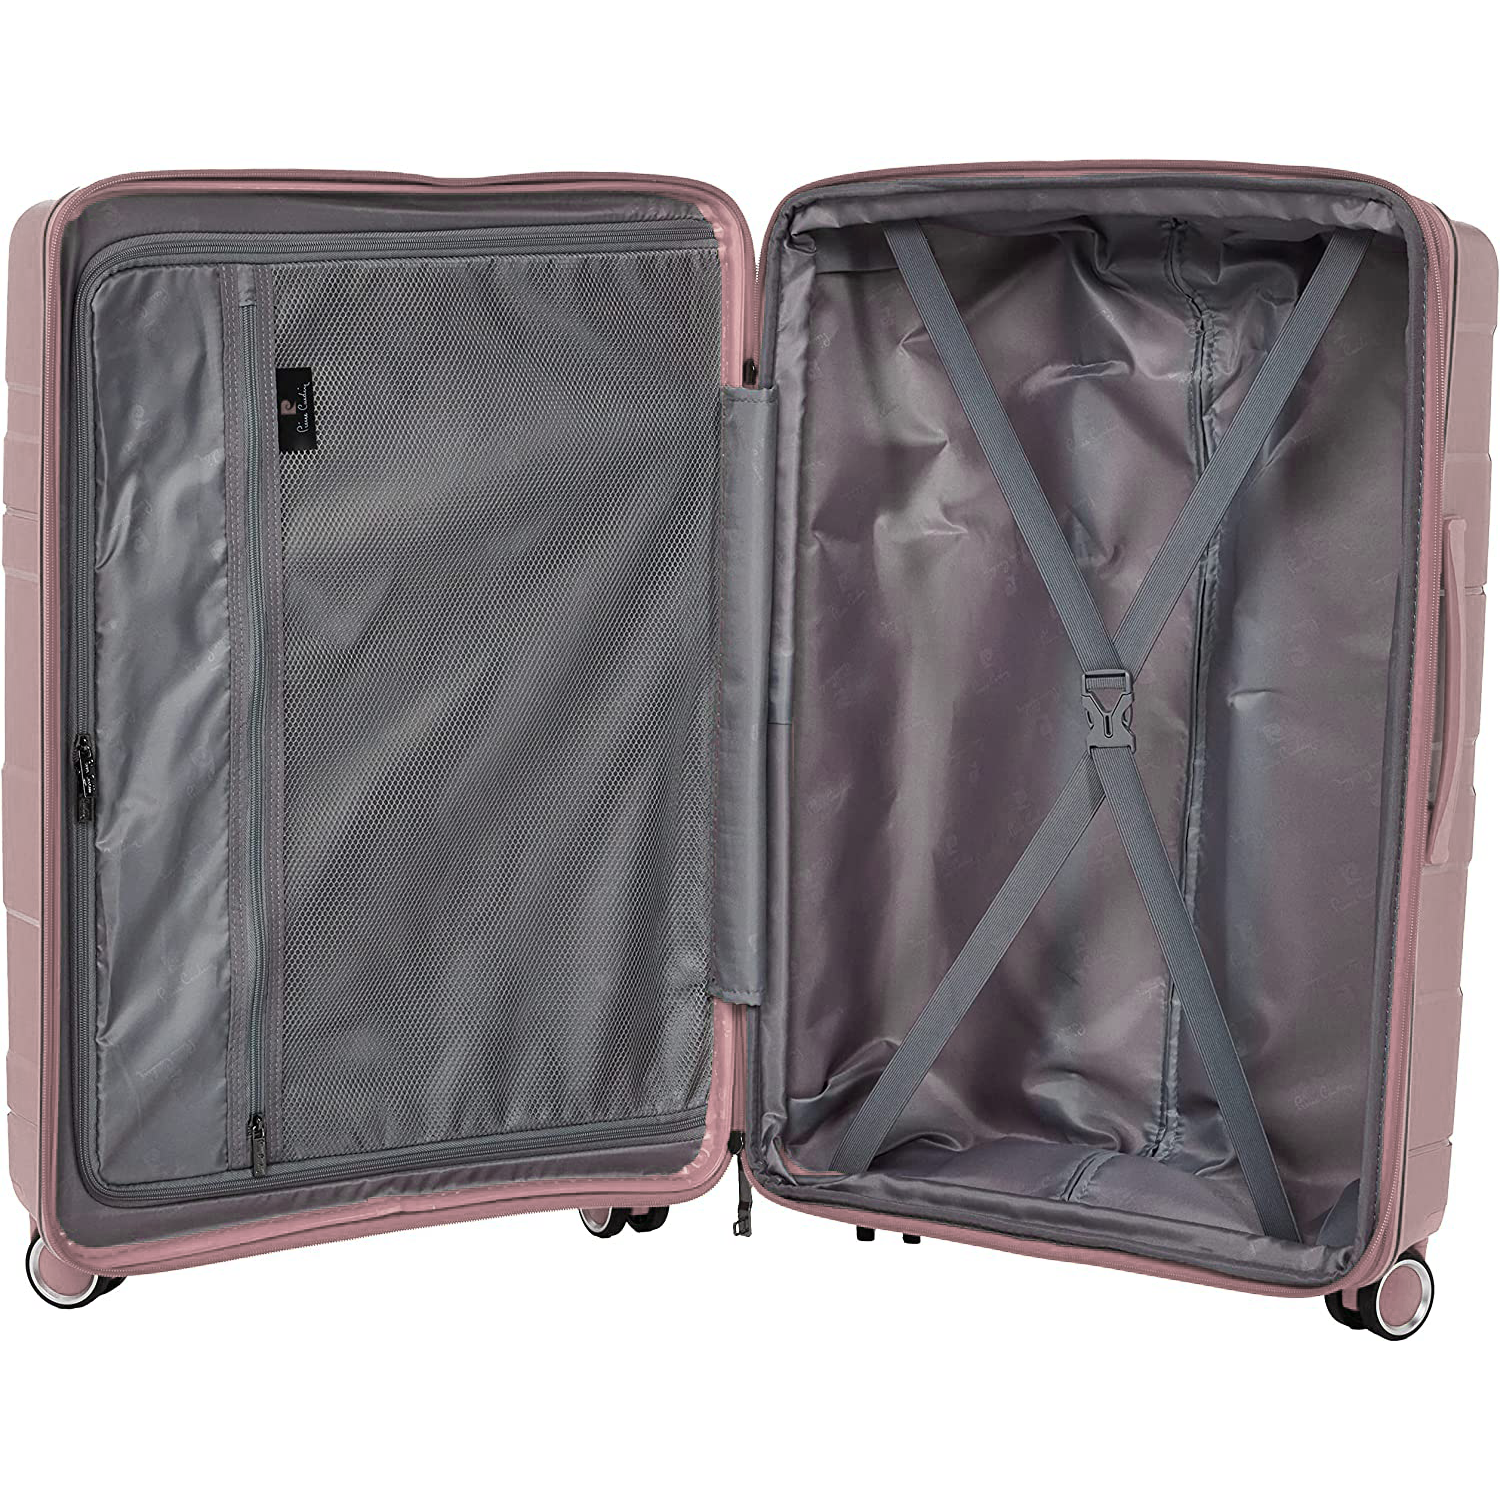 Pierre Cardin Zurich Collection Carry On - Rose Gold